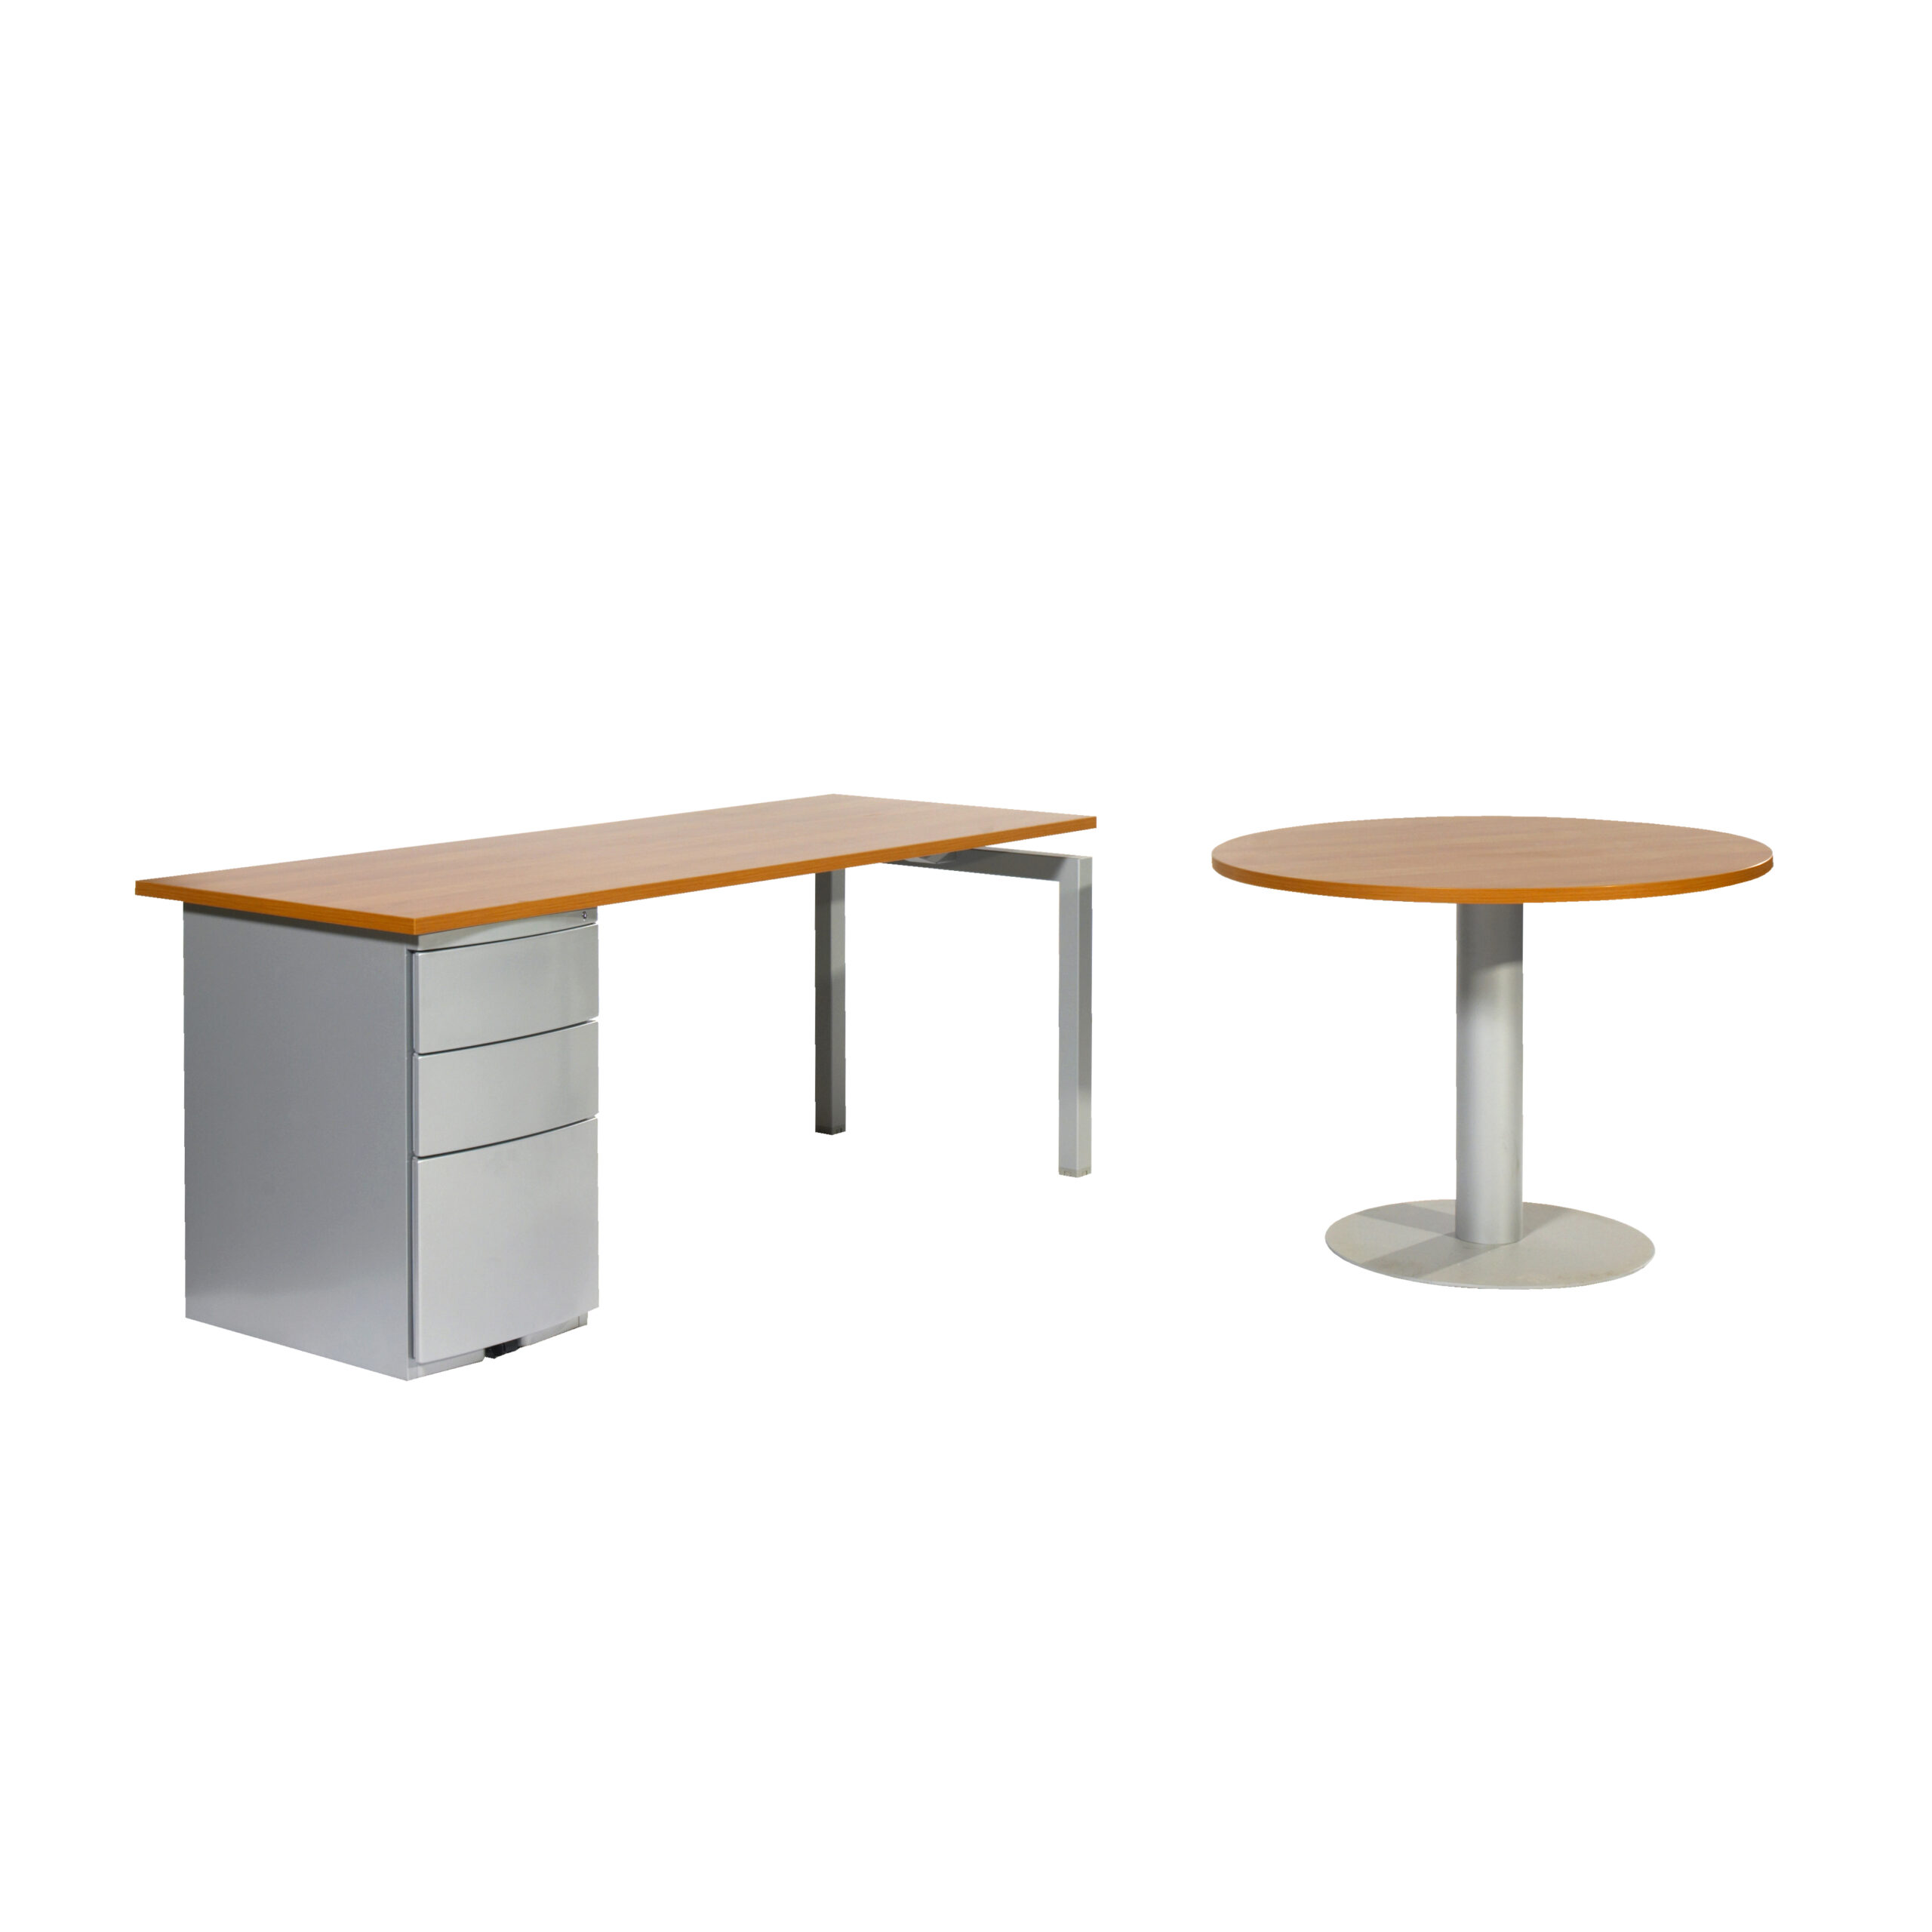 3. Bench profile - Rectangular desk and Pod Based meeting table